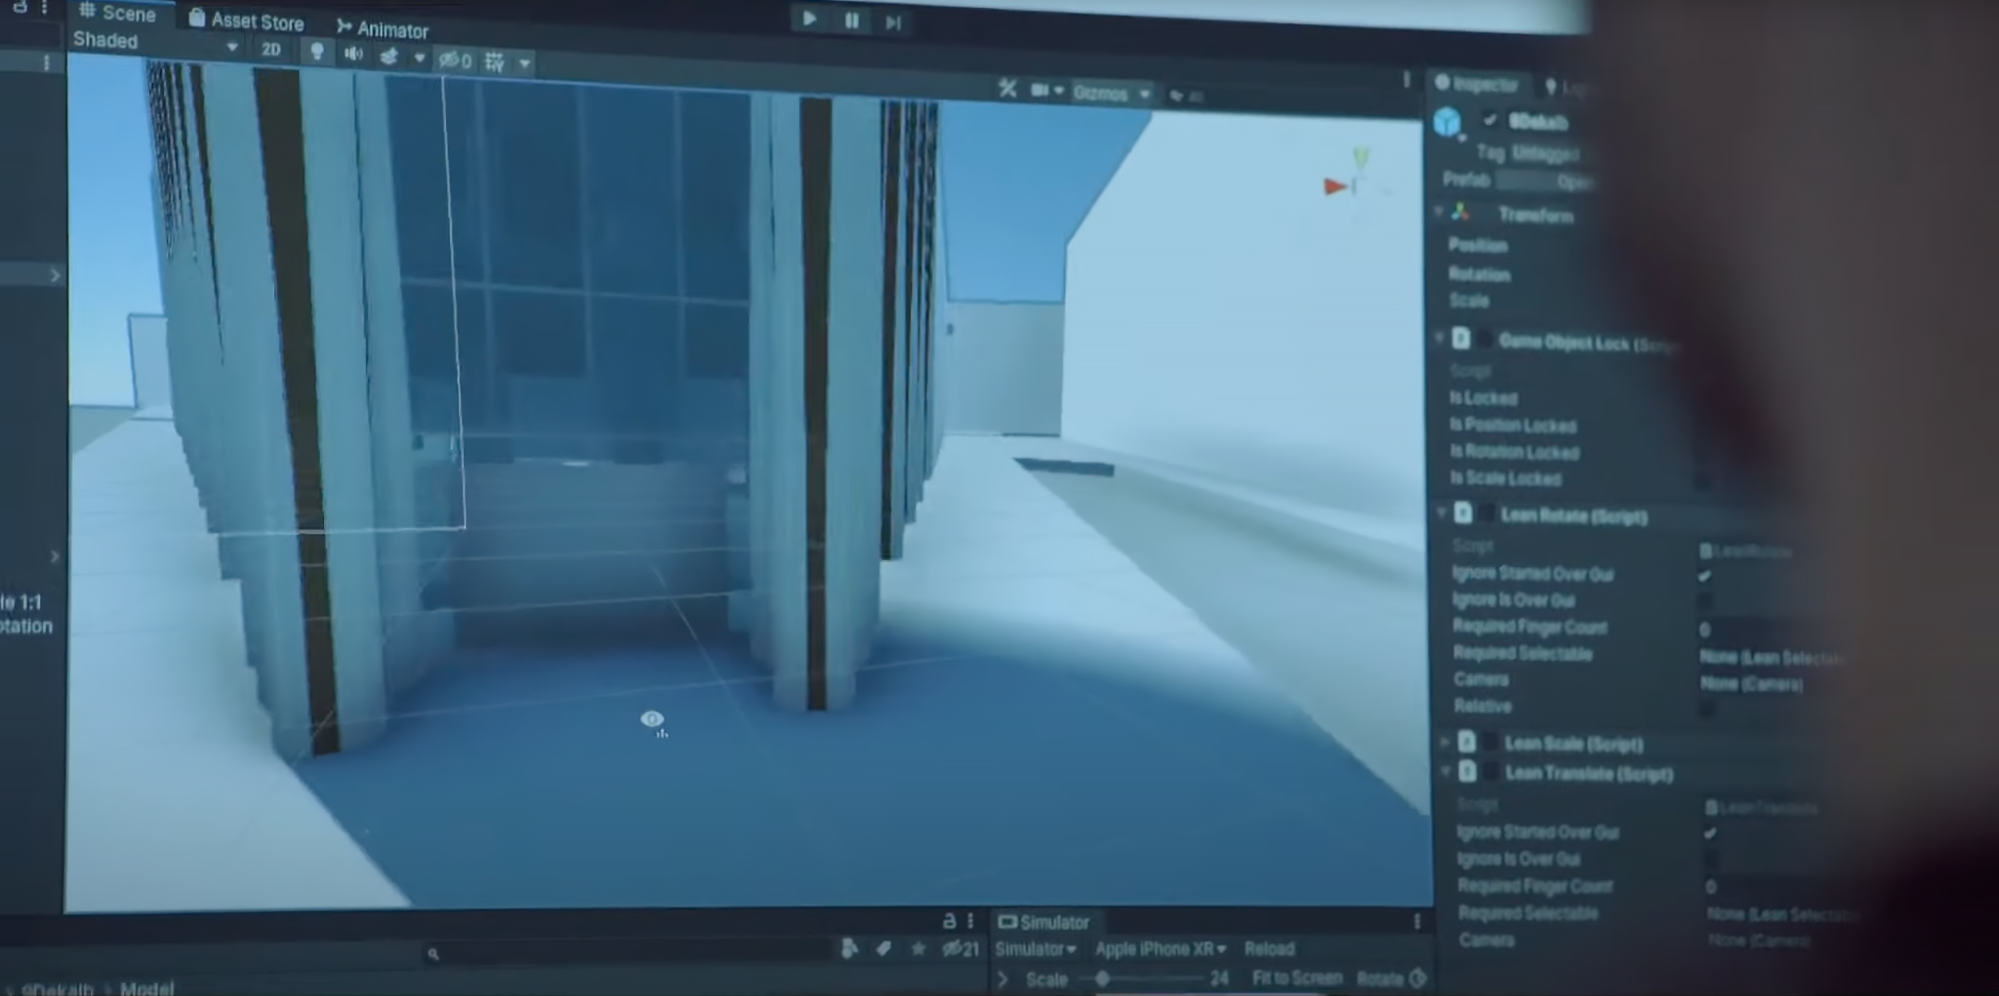 Image of Unity editor with mock-up of building bring worked on 